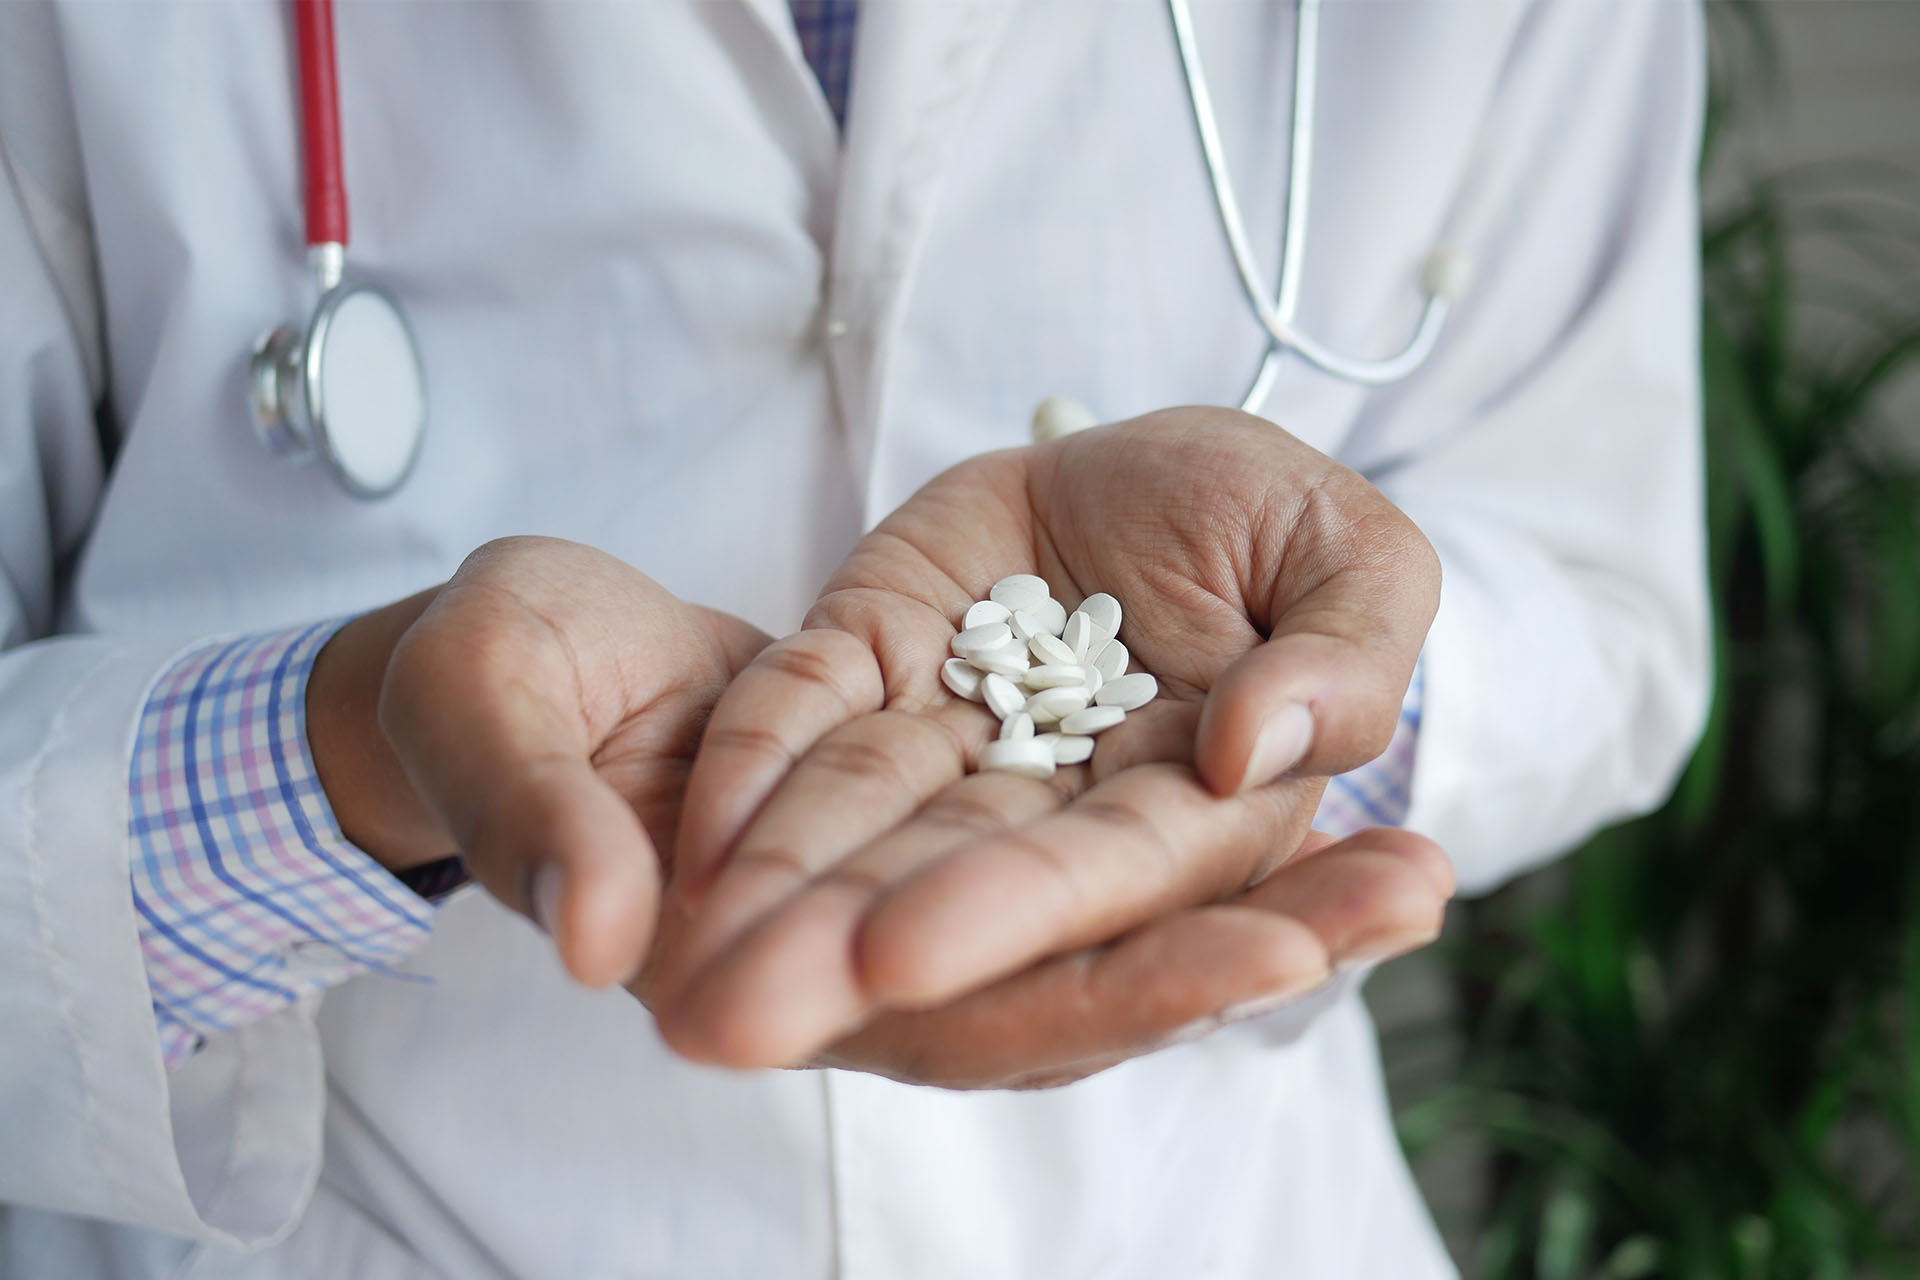 A medical professional in a white coat holds white pills in the palm of their hand